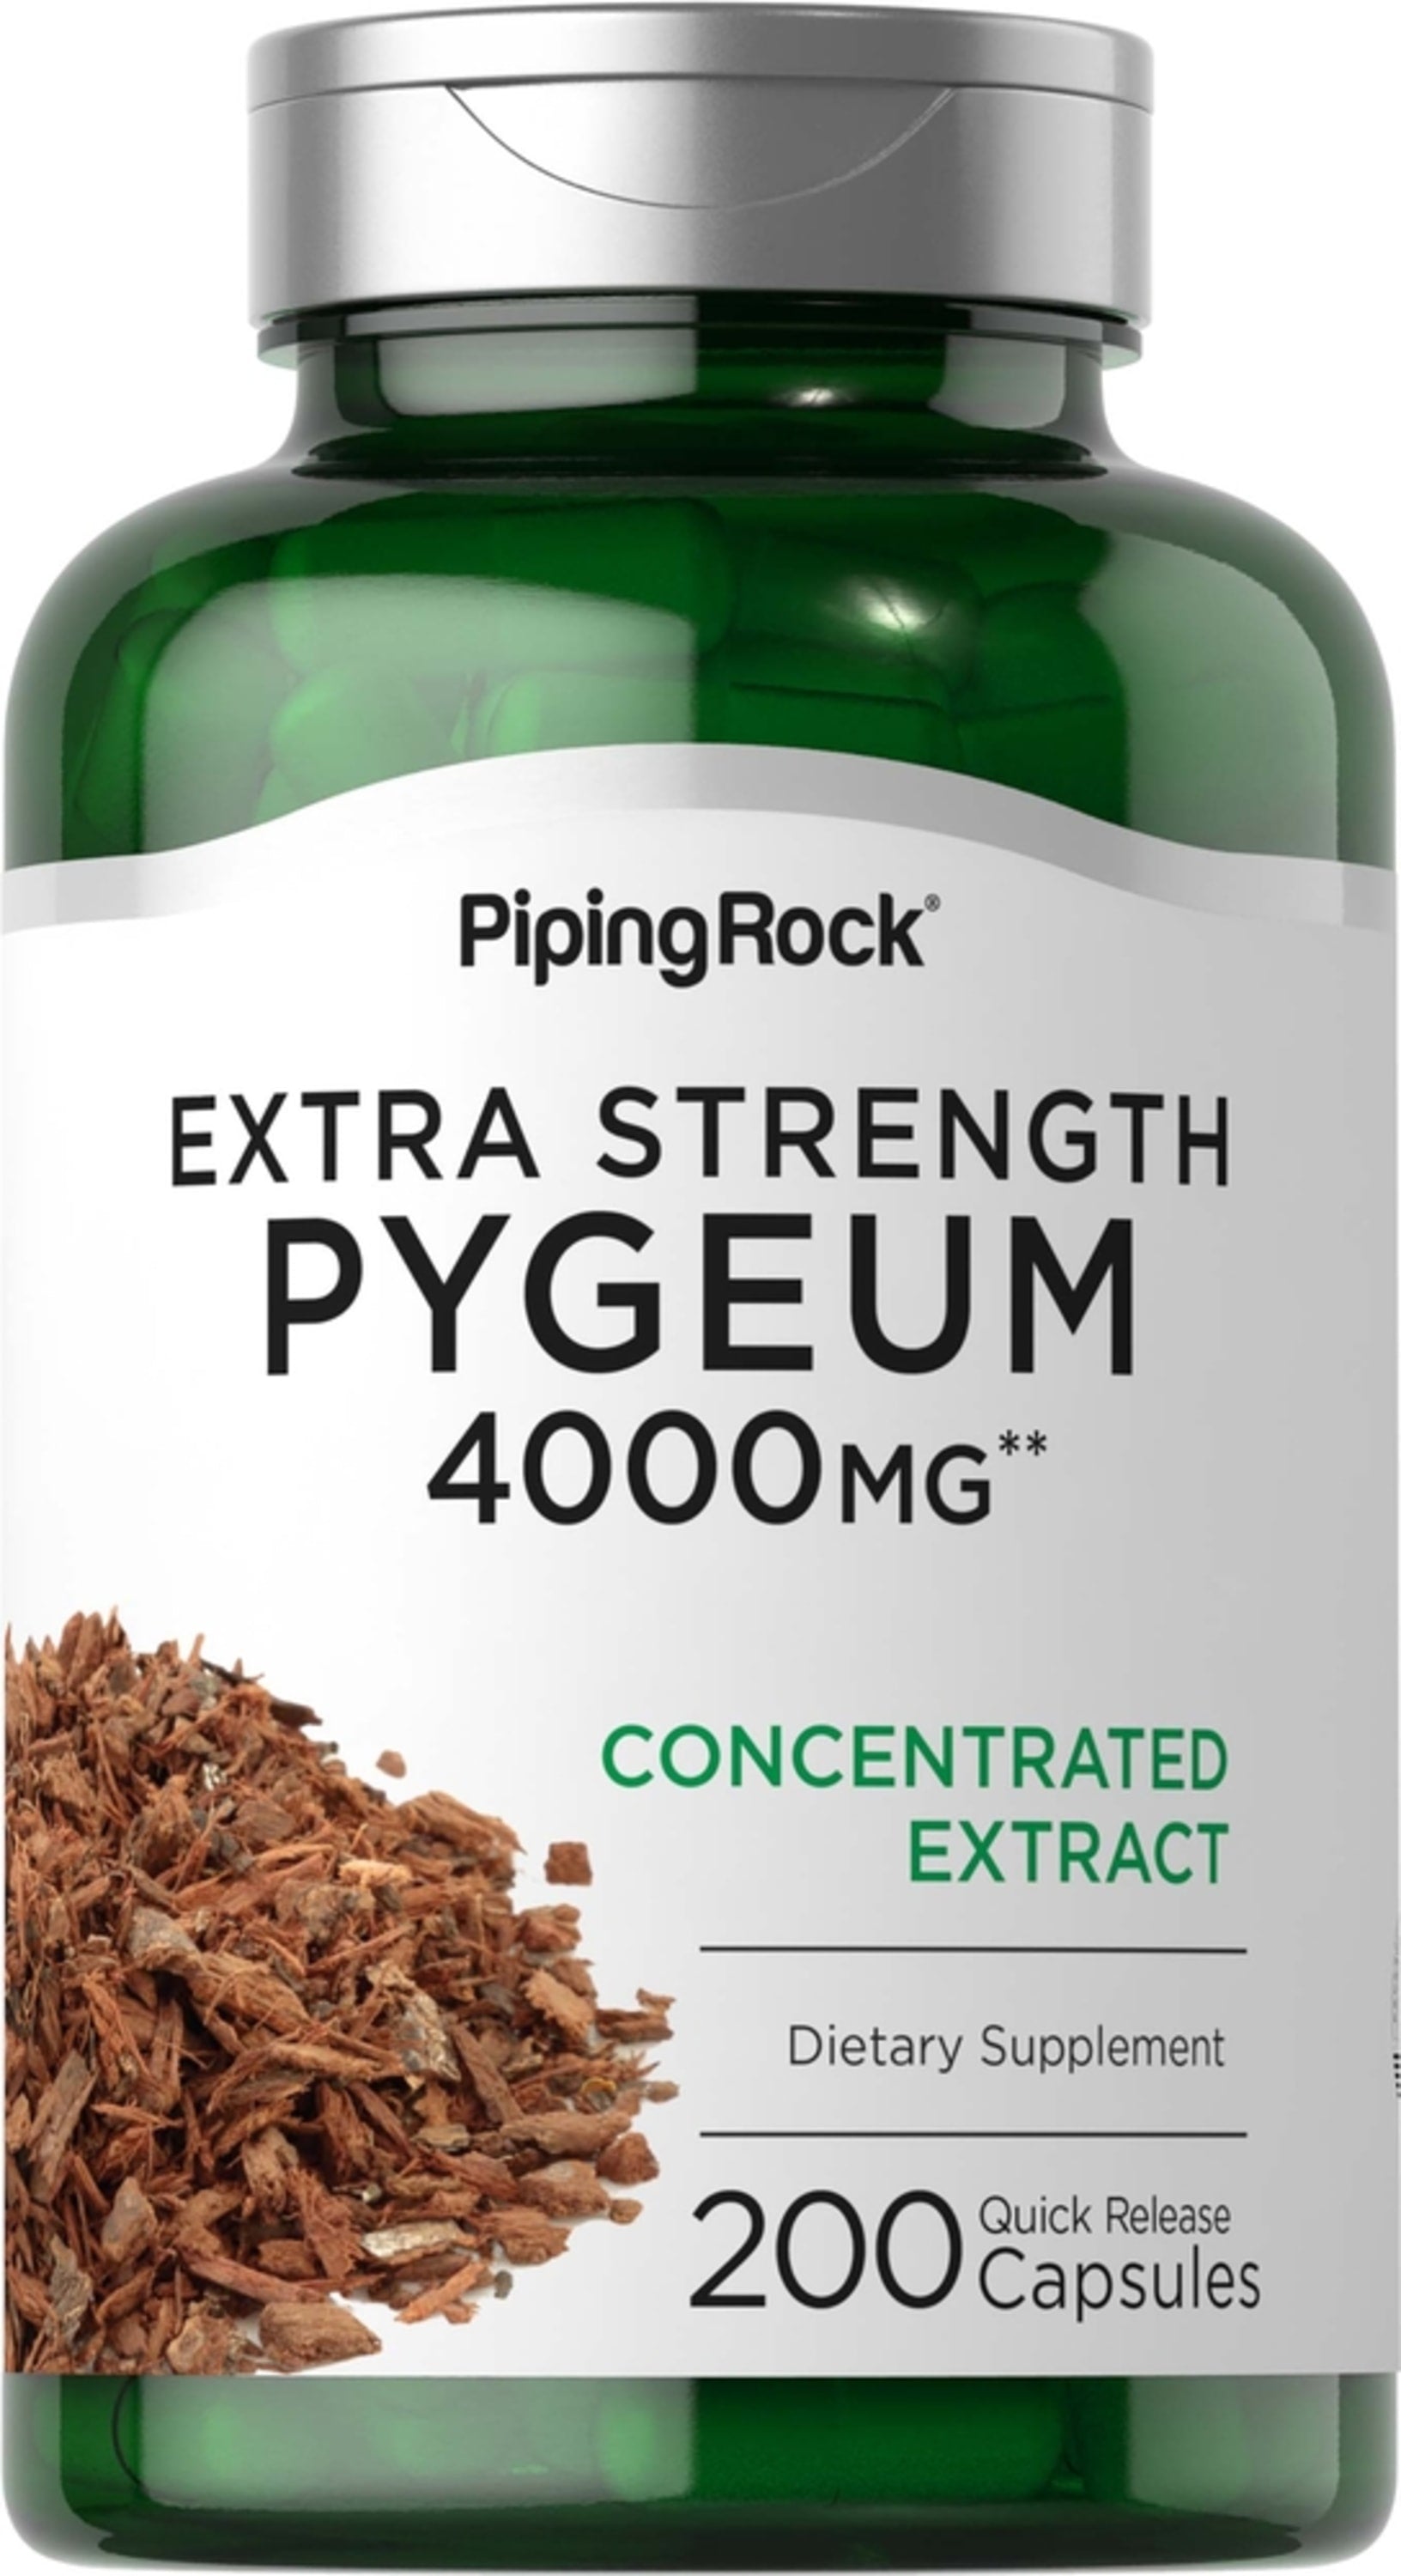 Extra Strength Pygeum, 4000 mg, 200 Quick Release Capsules